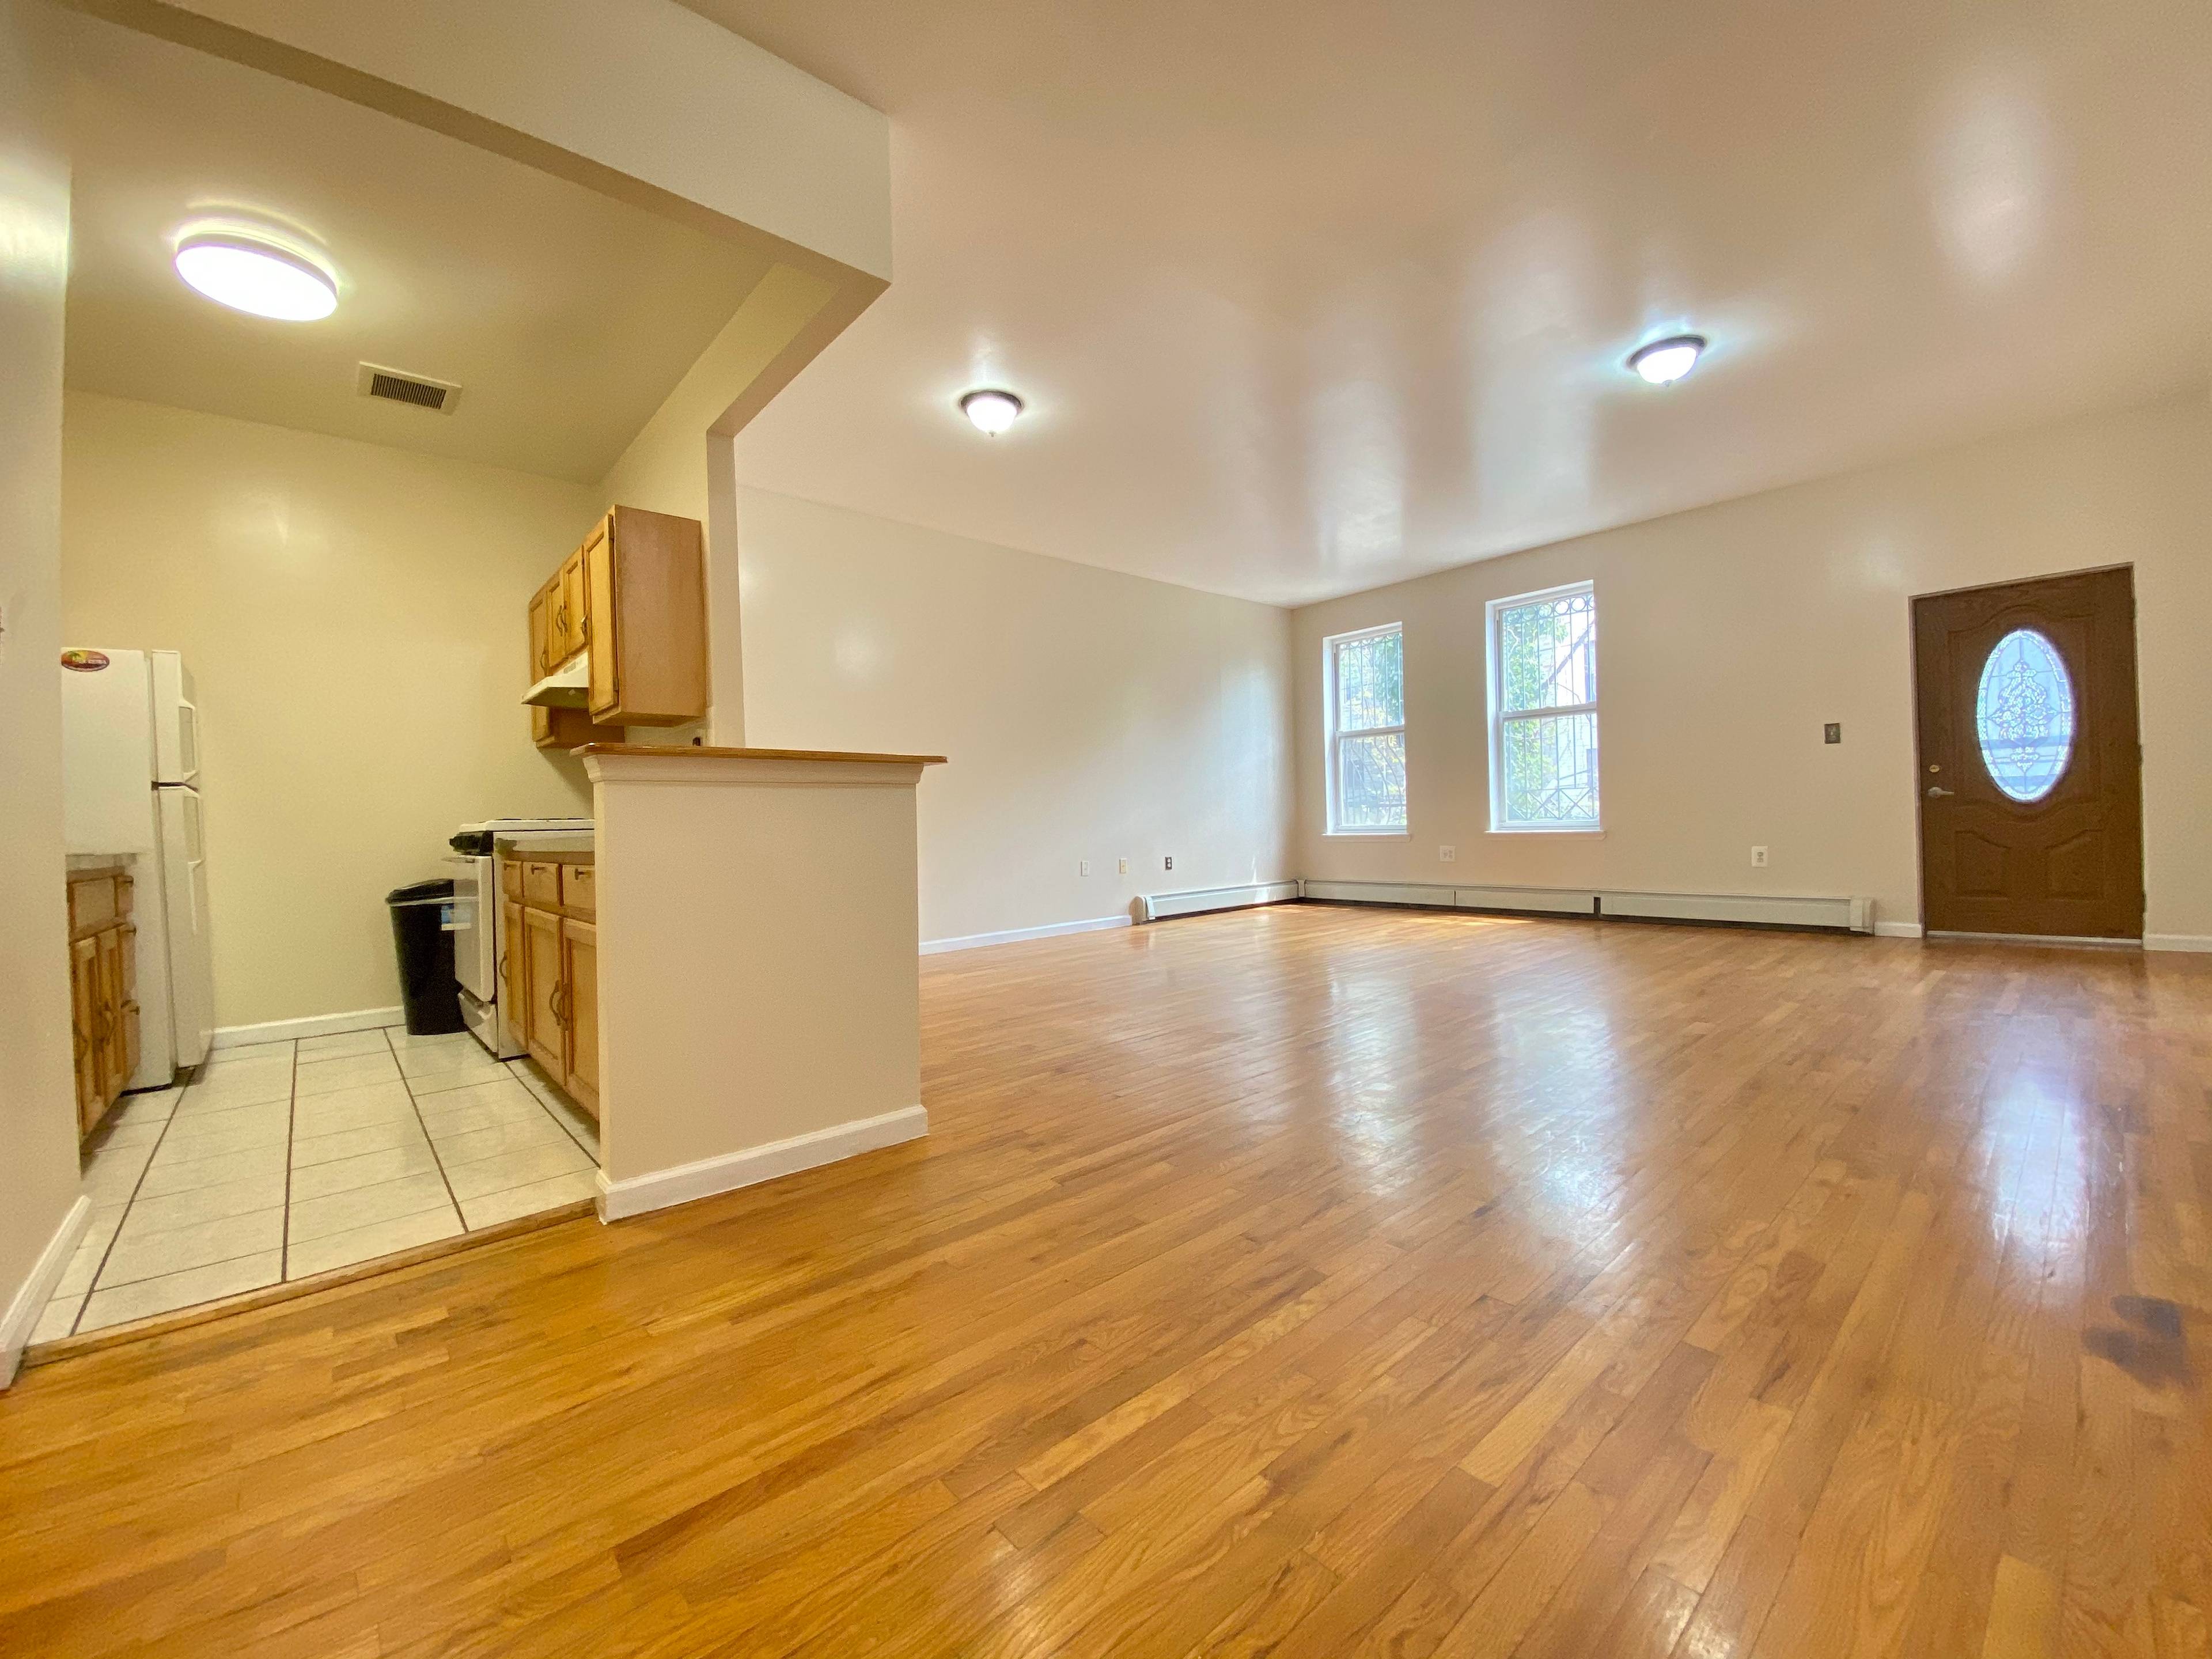 Extraordinarily spacious 1 bedroom with private backyard available For May 1st.